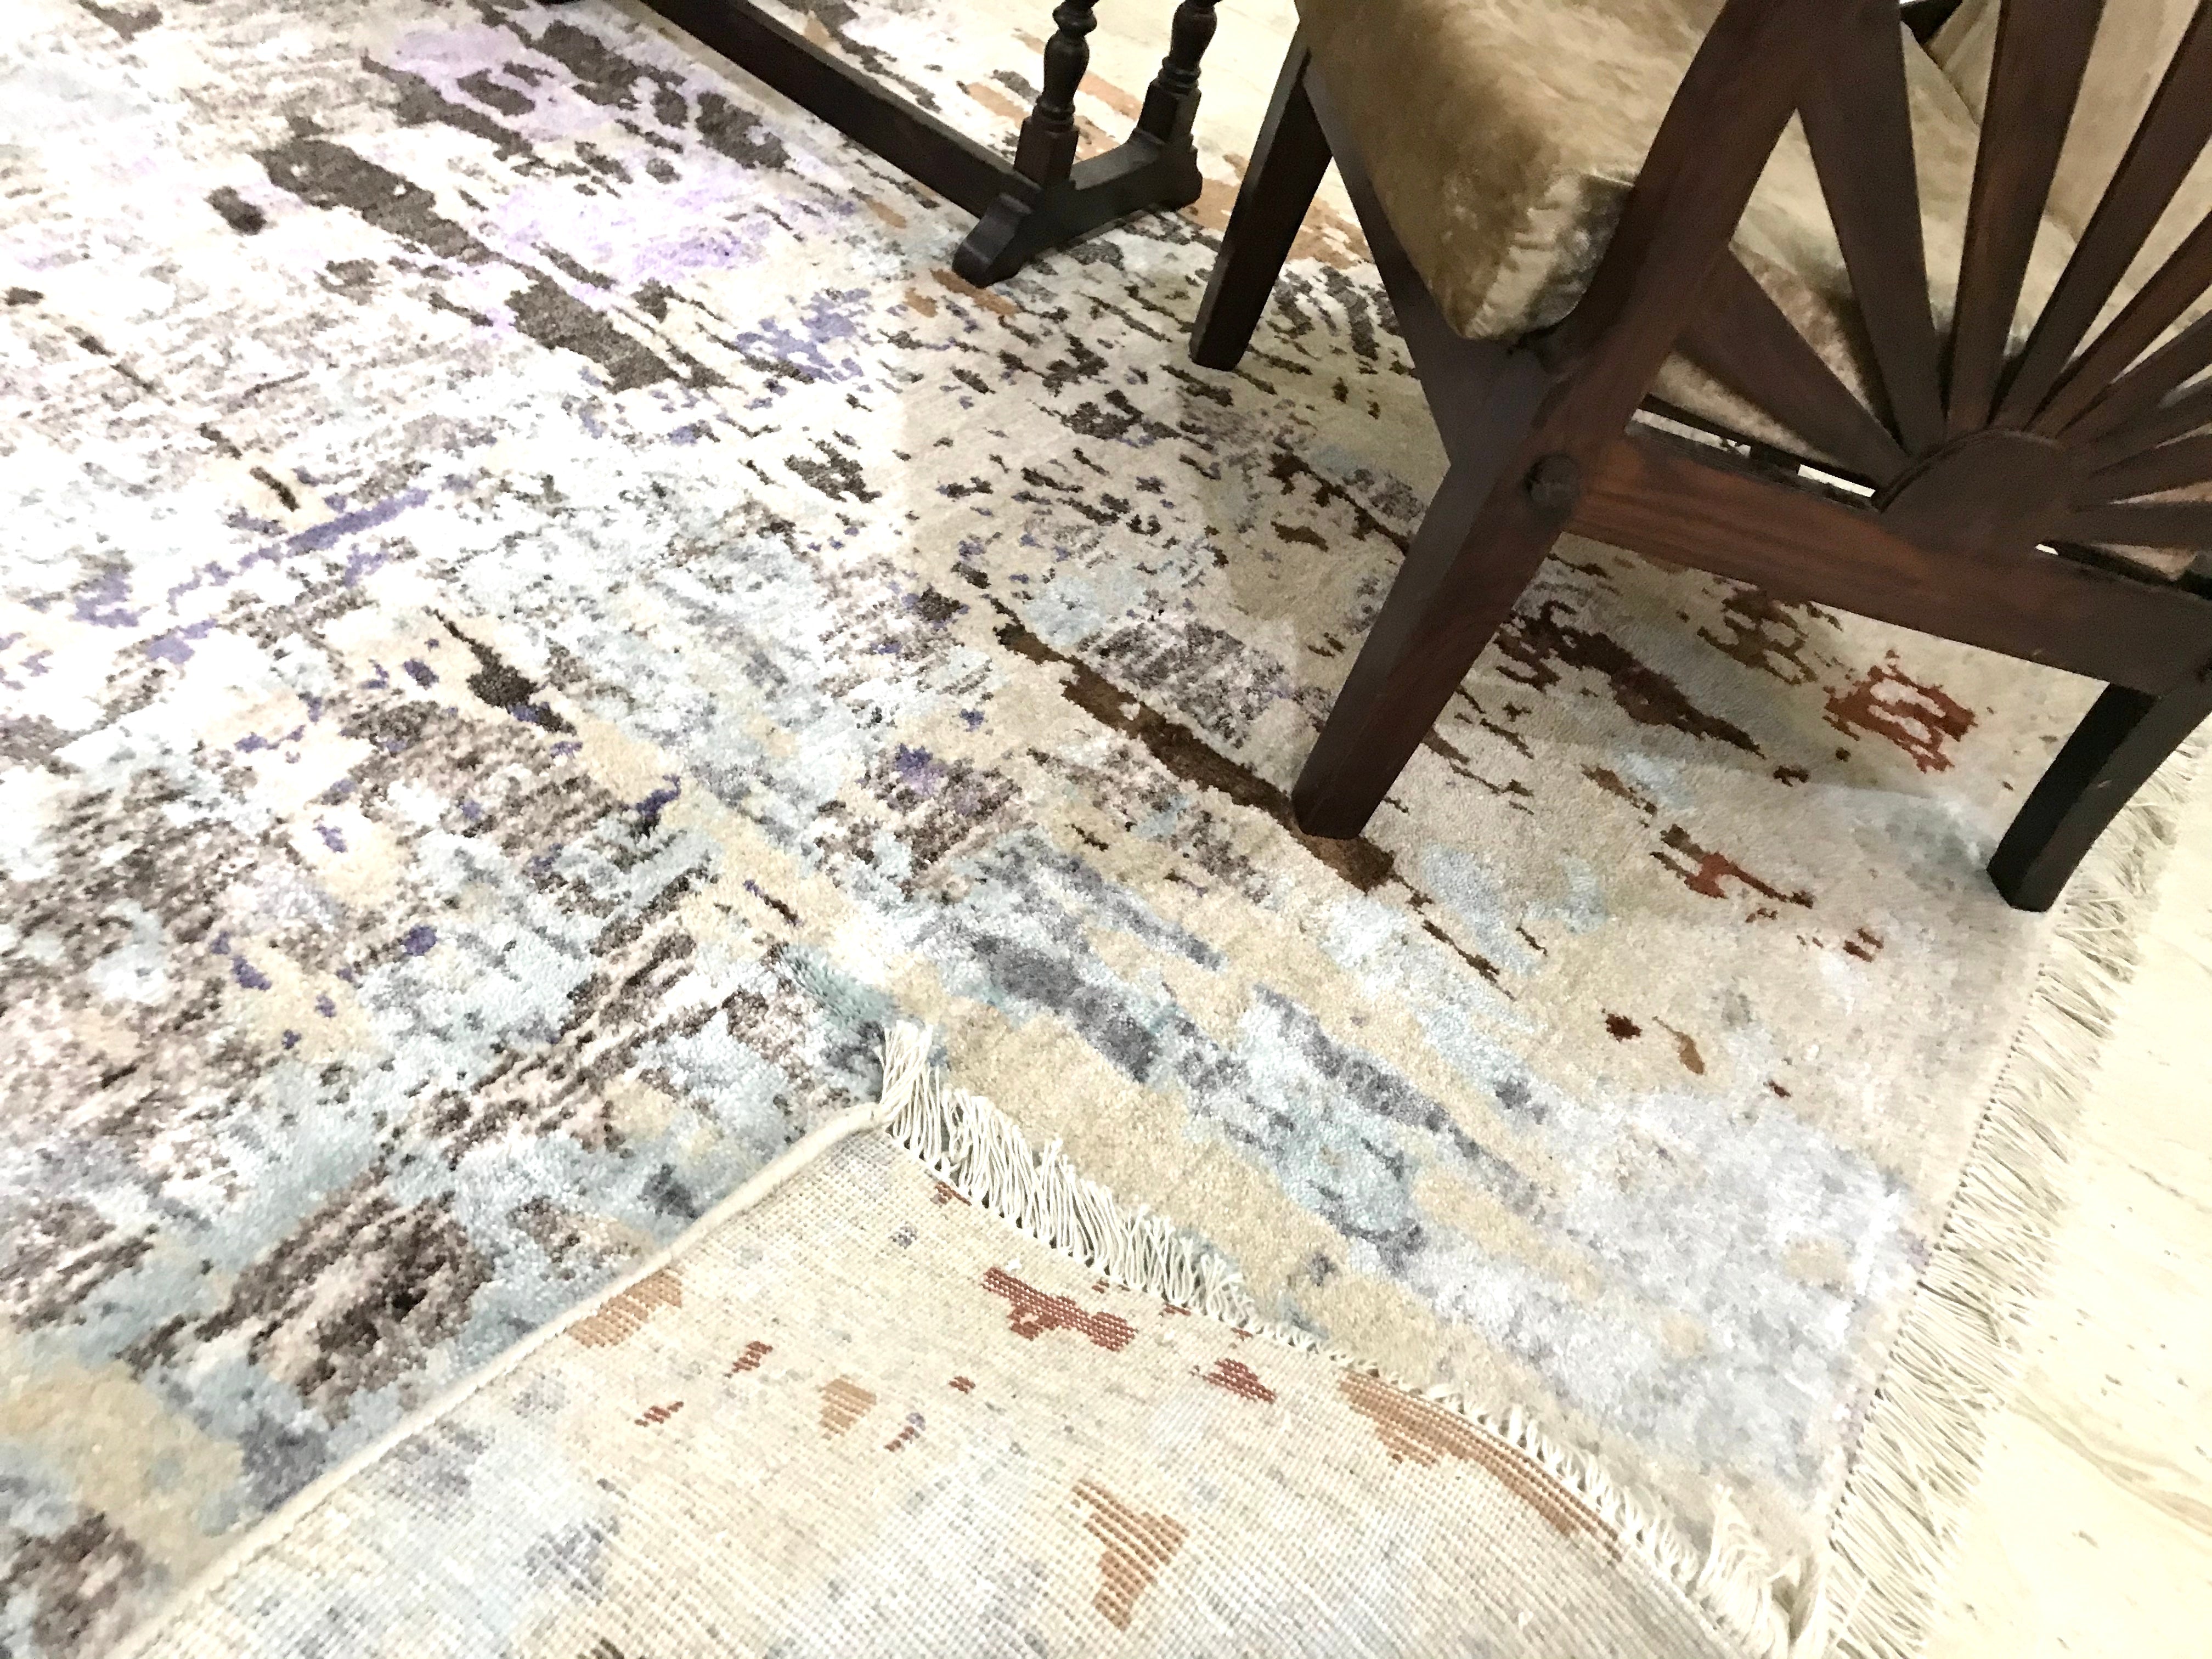 A modern rug/carpet with an abstract design. The rug is made of pastel colours. Creams, Blacks, Sea Blue and Sprinkles of brown and black. The size of the rug is 5 feet by 8 feet.